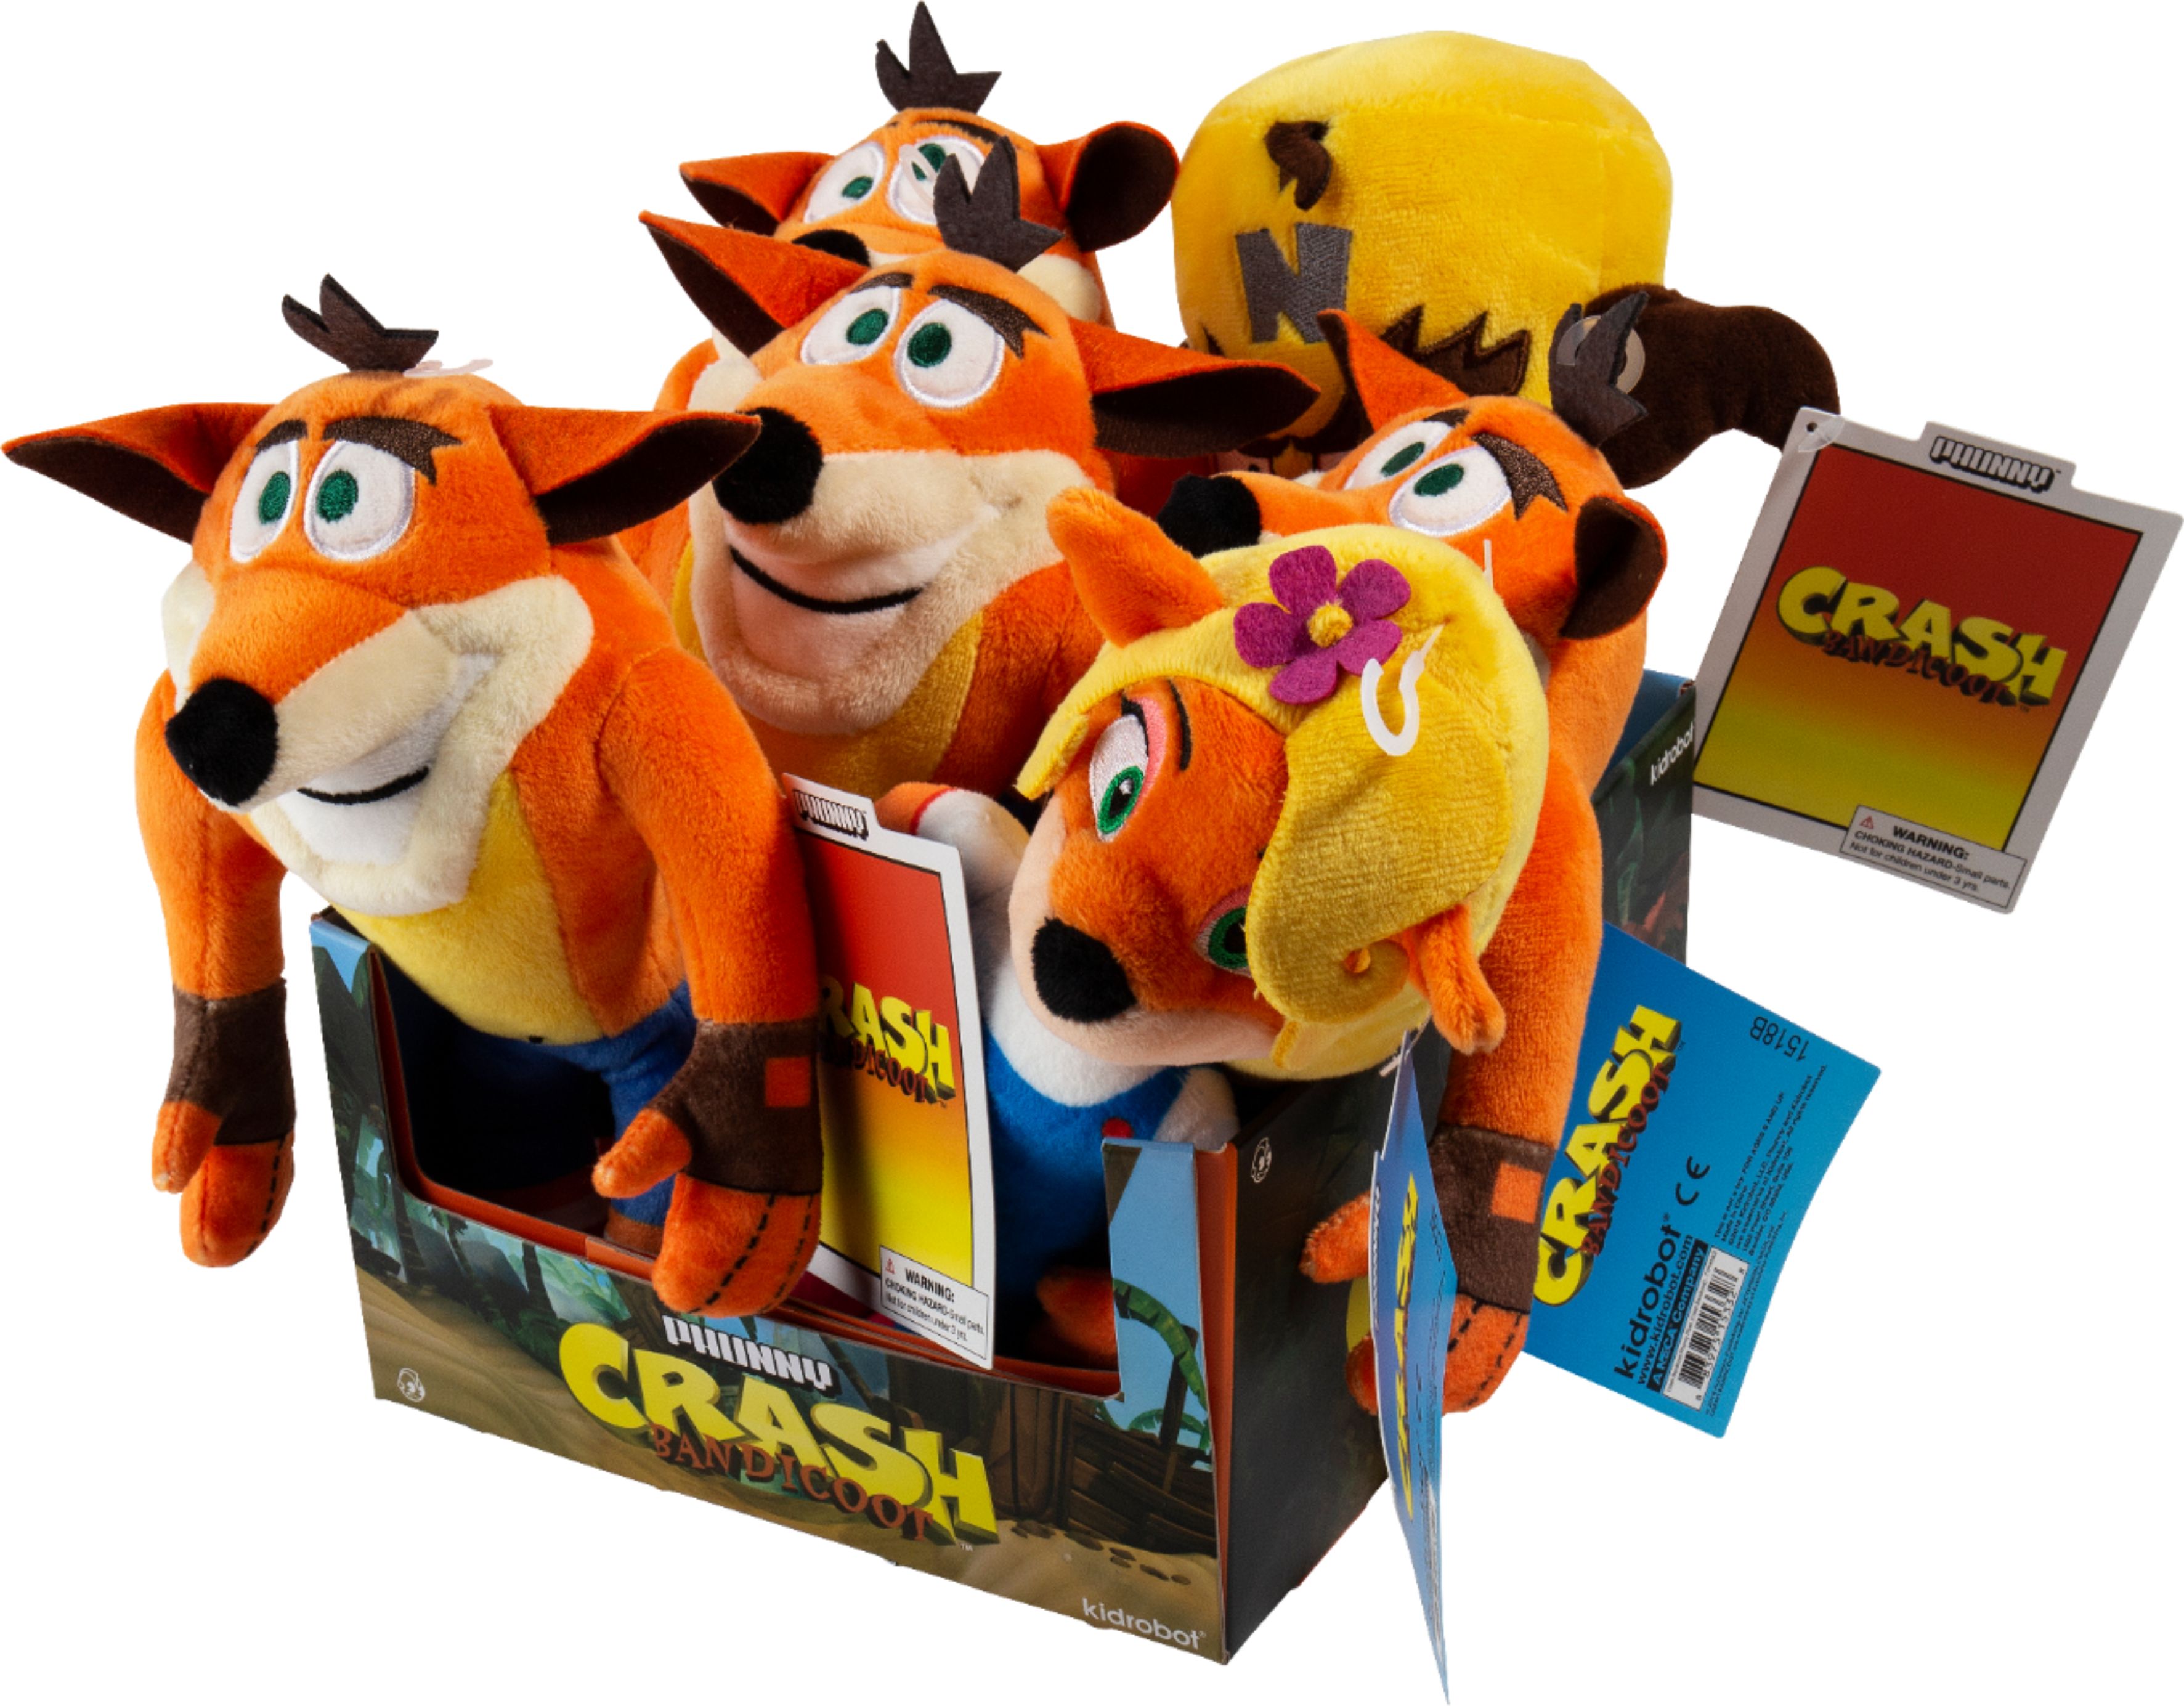 Crash Bandicoot Bandai Plush Toy | 15cm Soft Toy Collectible | Plushie  Girls and Boys Toys for Video Game Fans | Collectable Cuddly Toys for Boys  and